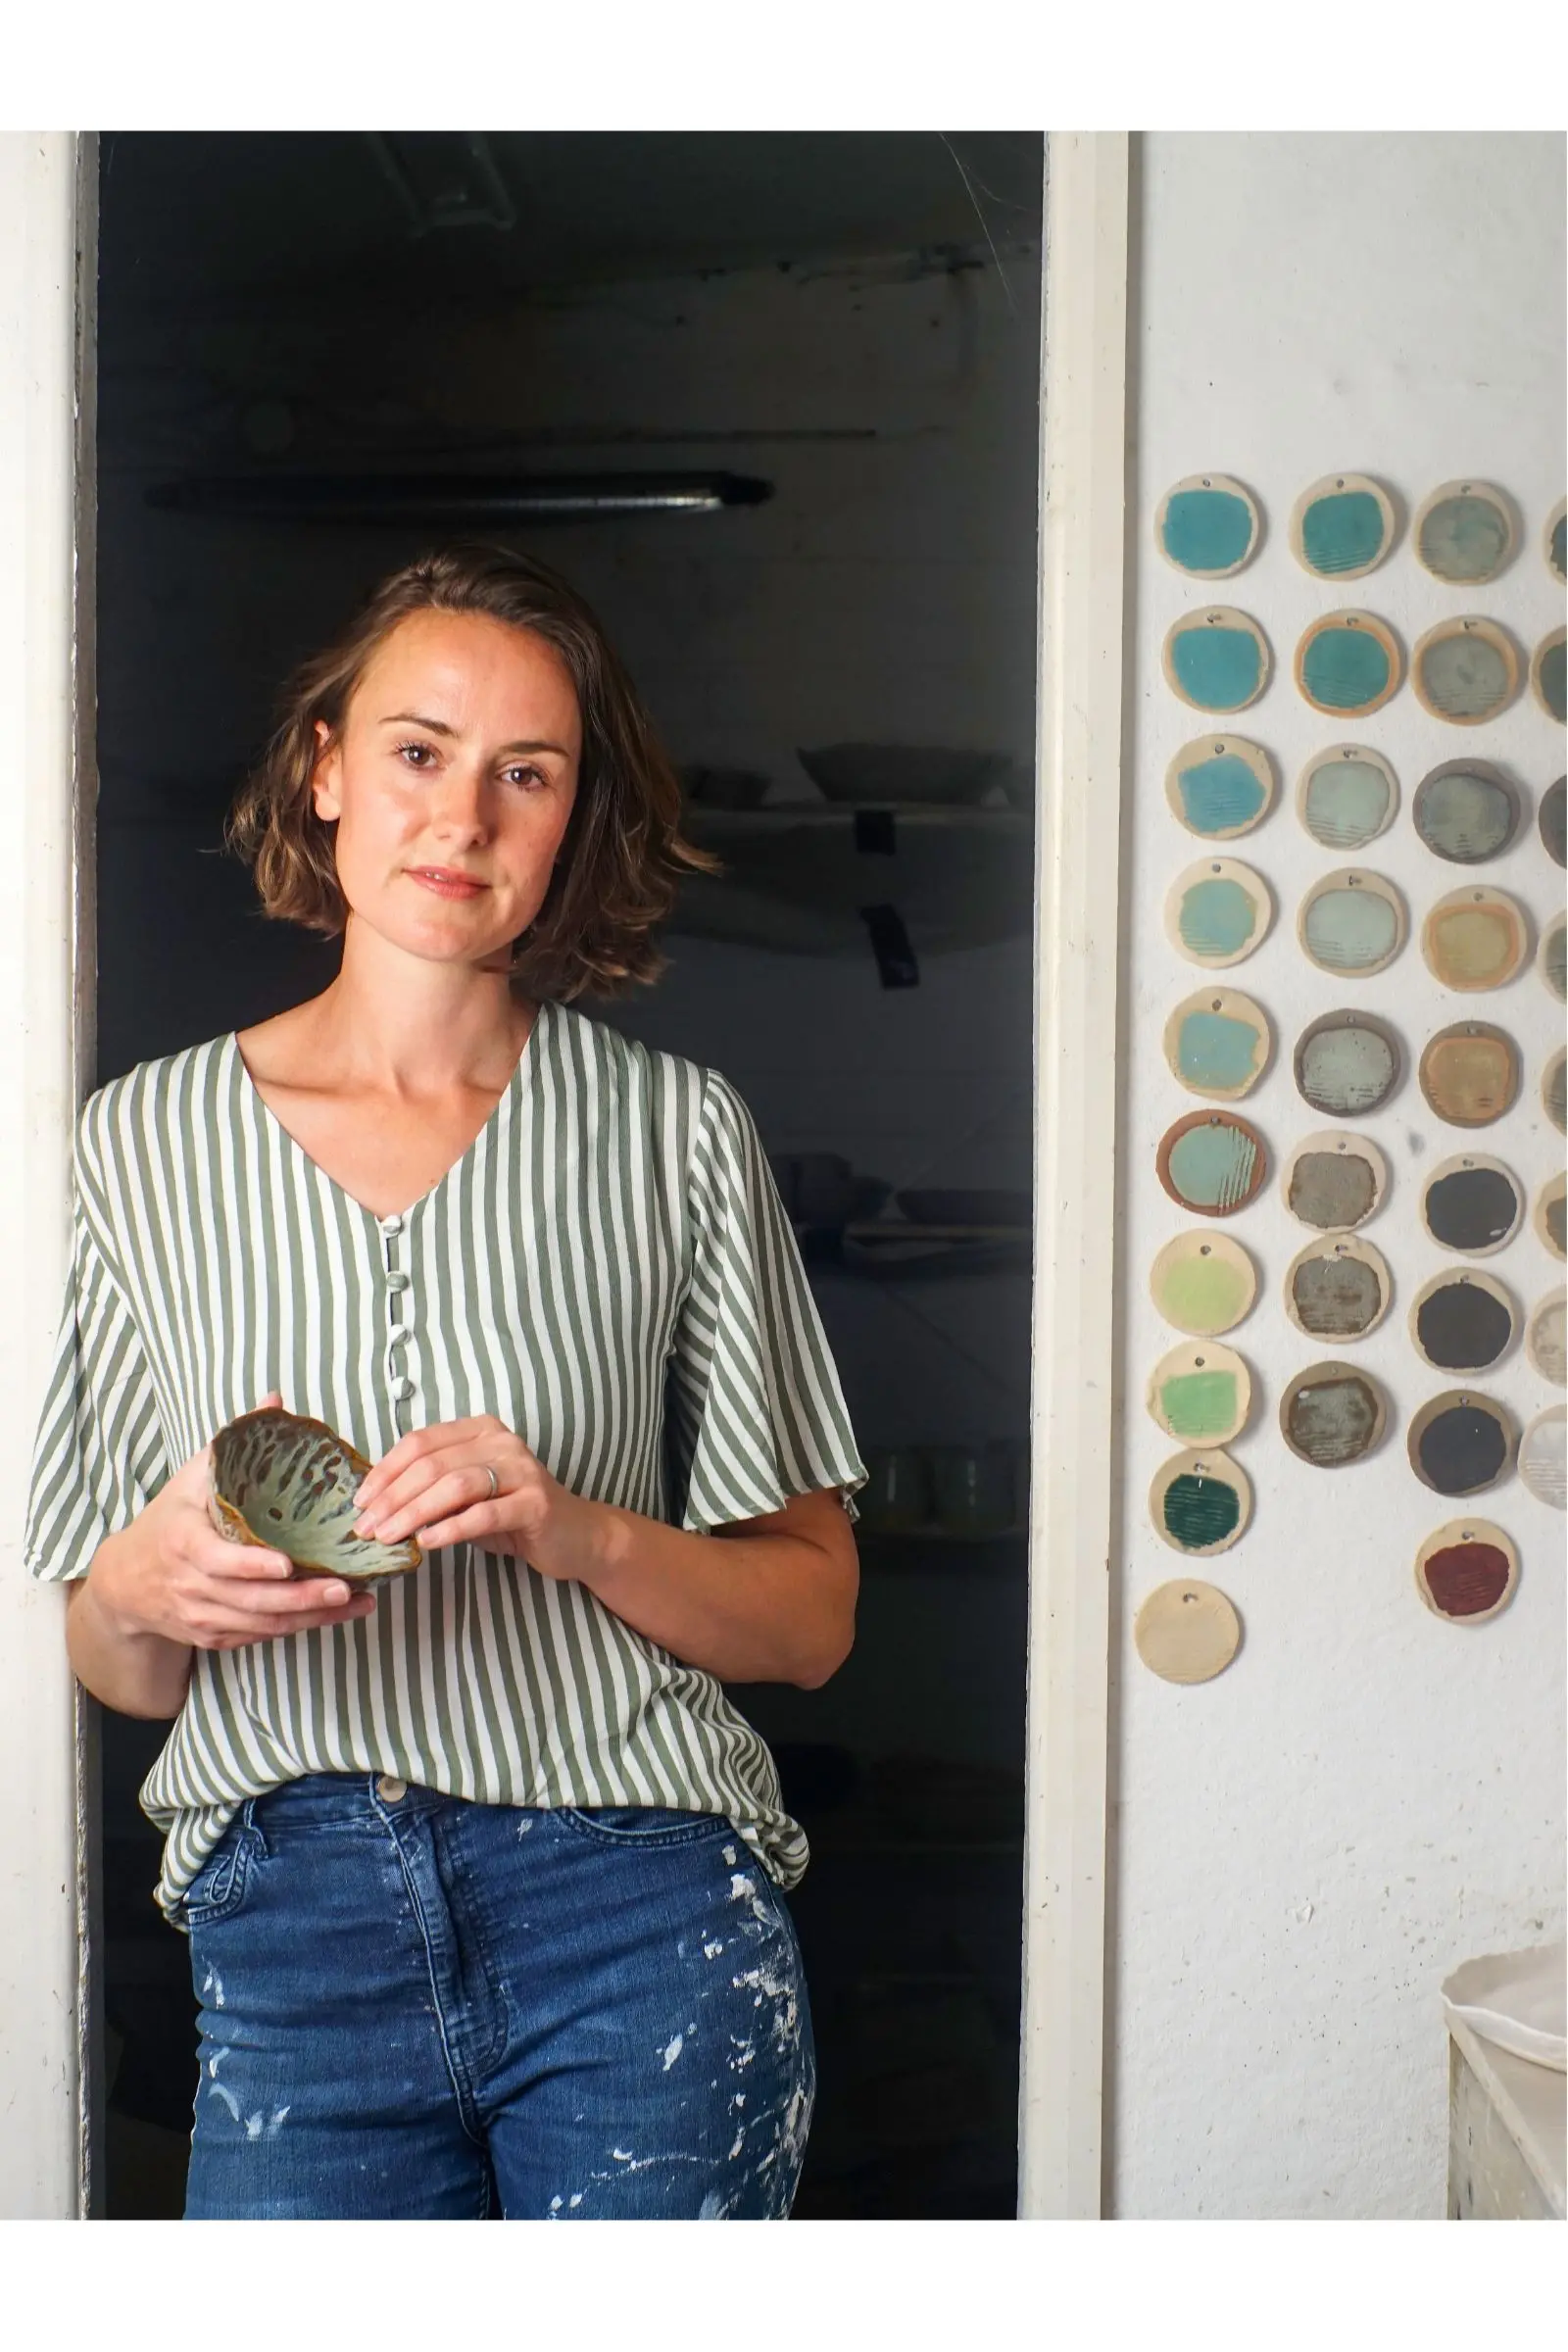 Jenny Hopps J.Hopps Pottery standing in the doorway of her studio wearing a striped shirt. There are ceramic samples on the wall and Jenny is holding a ceramic bowl.